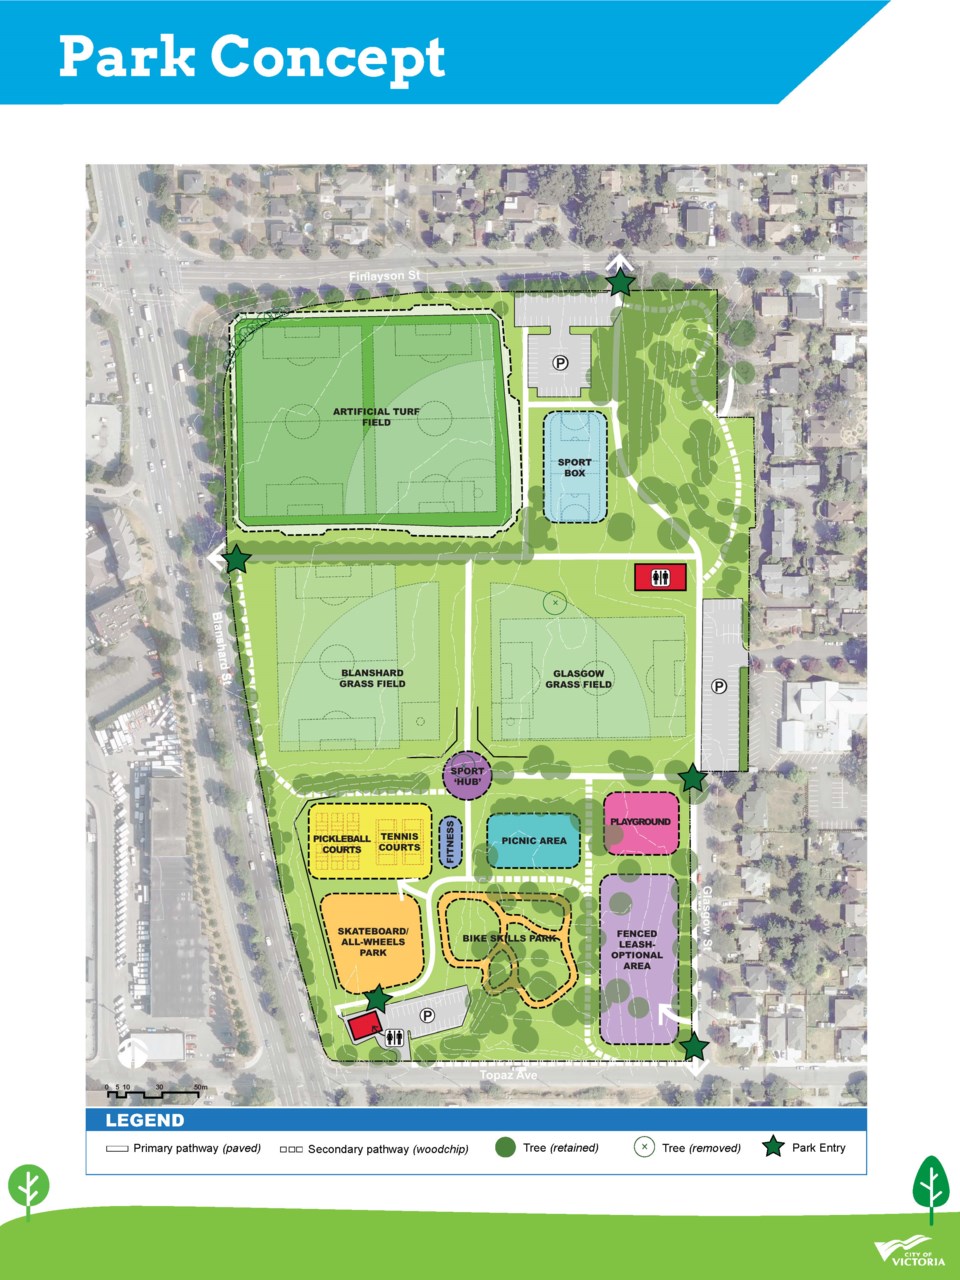 Proposed changes to Topaz Park in Victoria